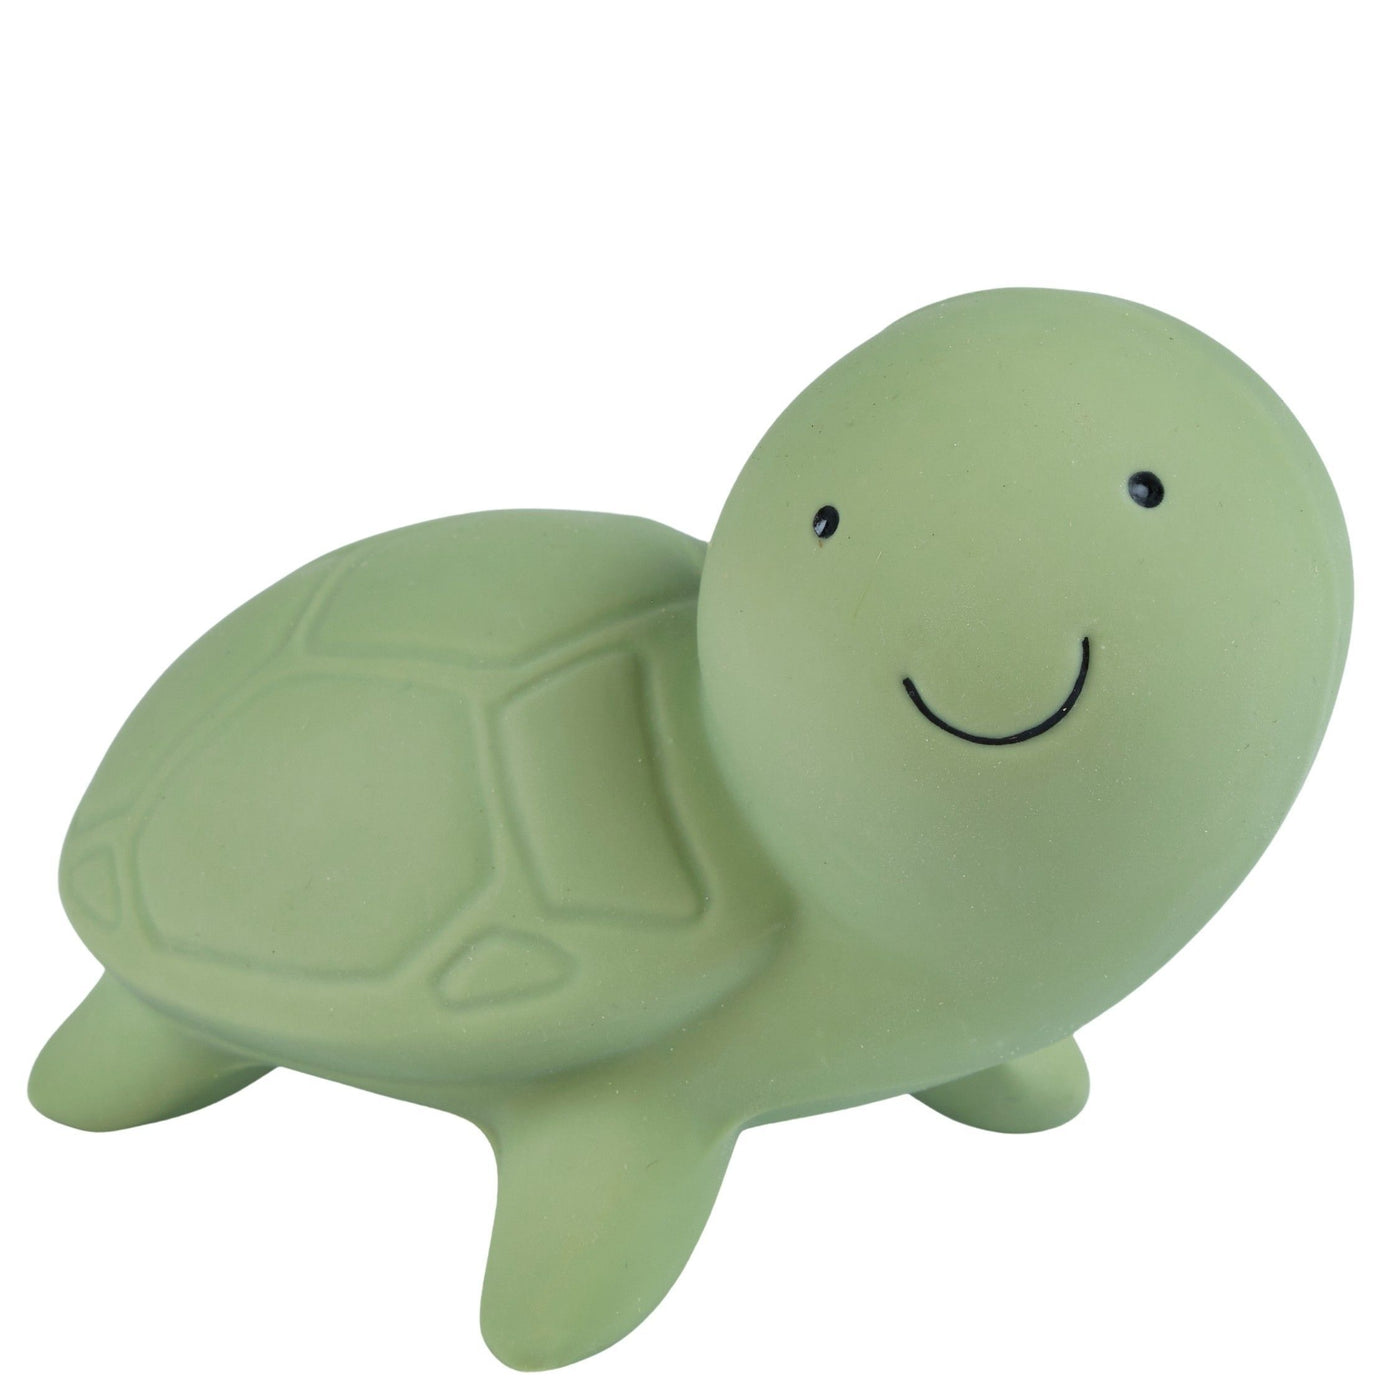 TURTLE - Organic Natural Rubber Teether, Rattle & Bath Toy